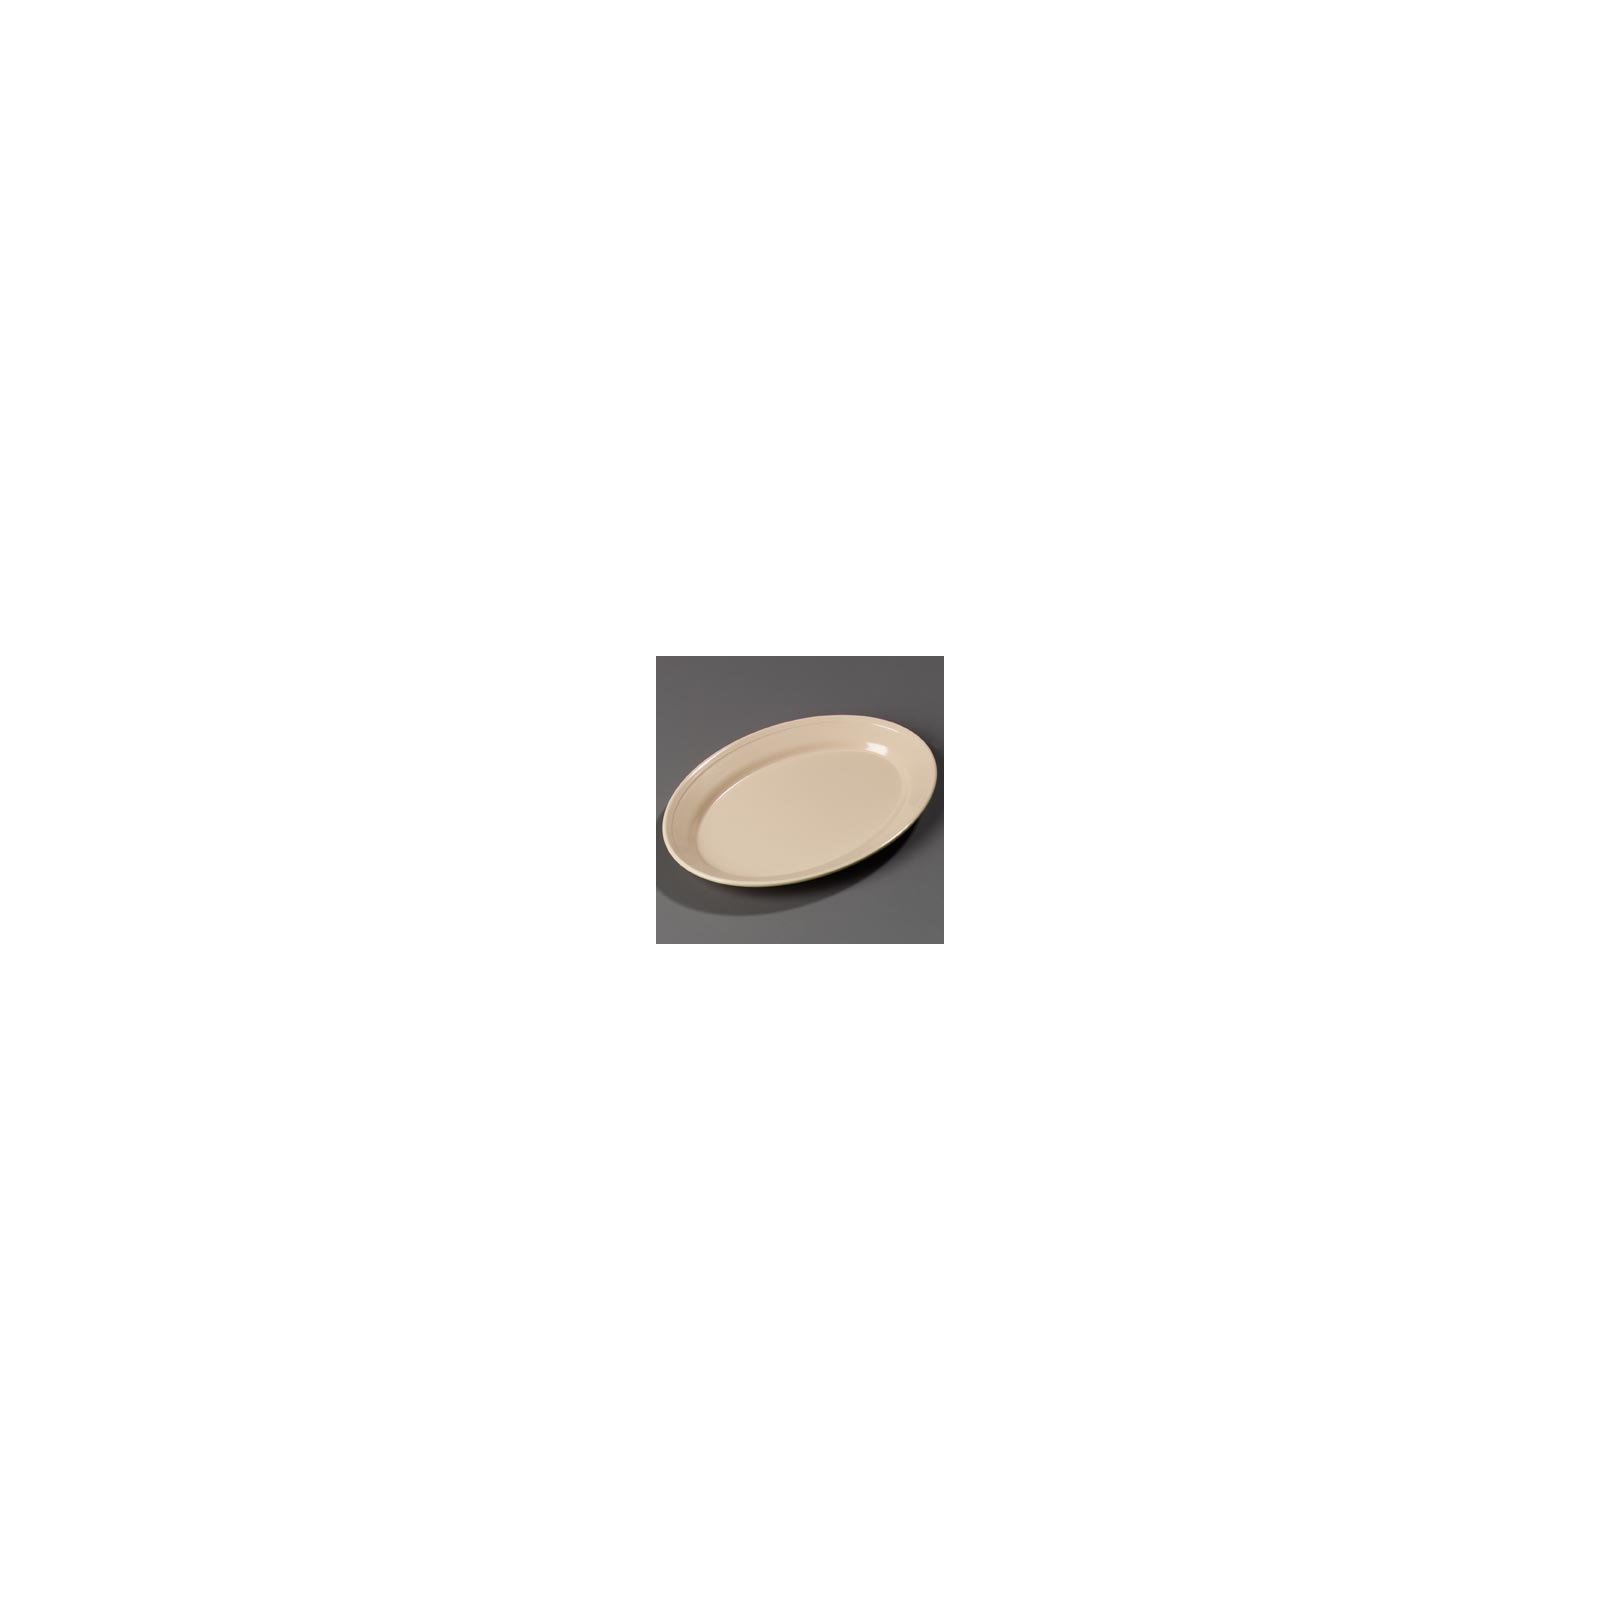 Pack of 24 12 x 8.50 Carlisle FoodService Products 43560-25 Carlisle 4356025 Dallas Ware Melamine Oval Platter Tray 12 x 8.50 Tan